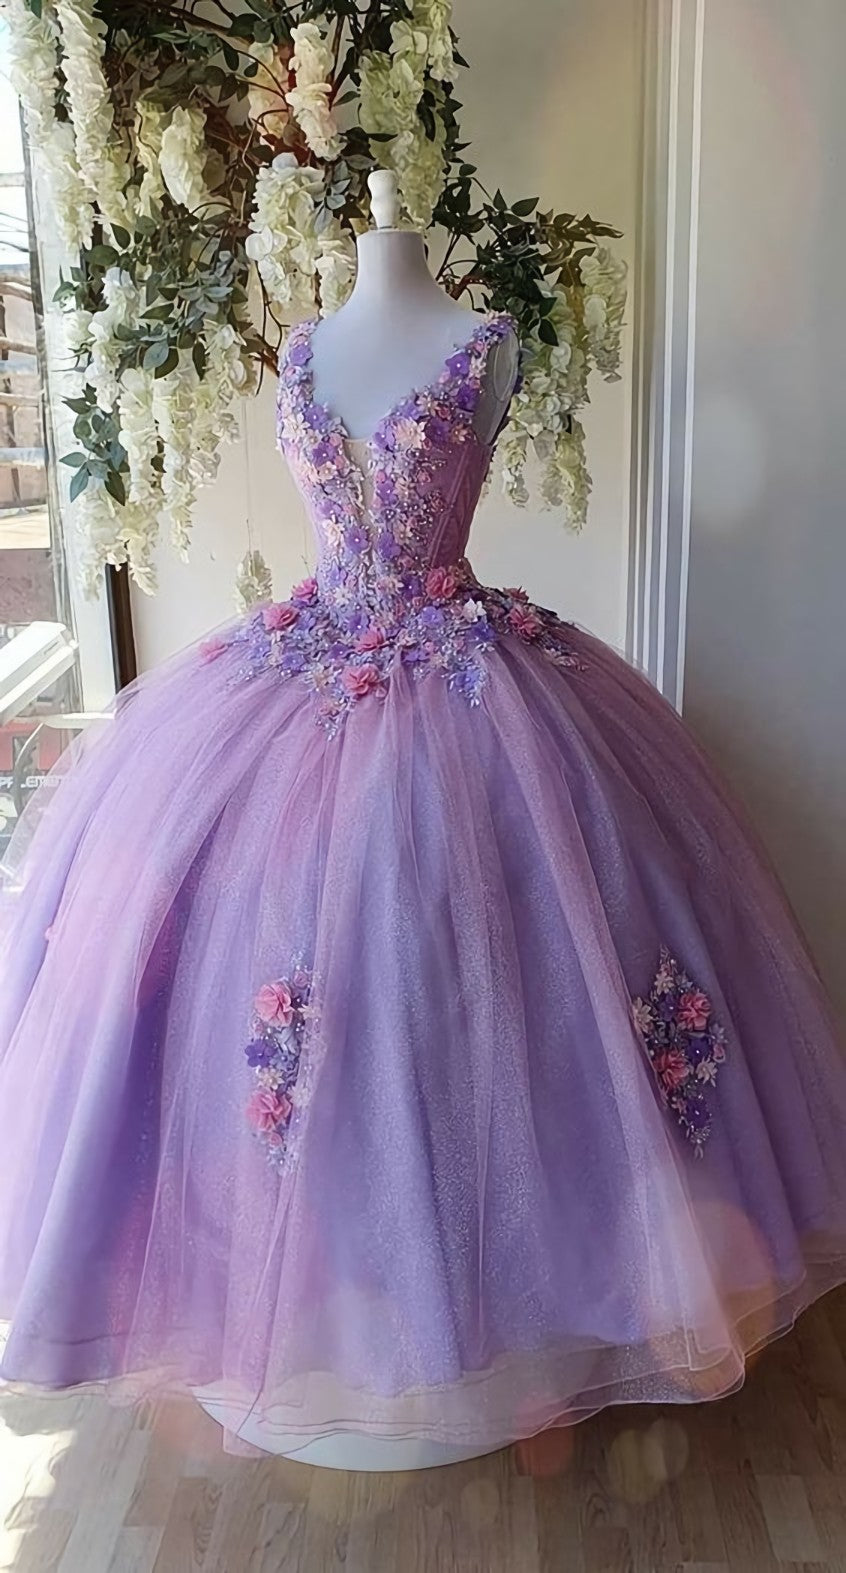 Princess Tulle Long Corset Prom Dress with Flower,Ball Gowns Quinceanera Dresses outfit, Bachelorette Party Theme